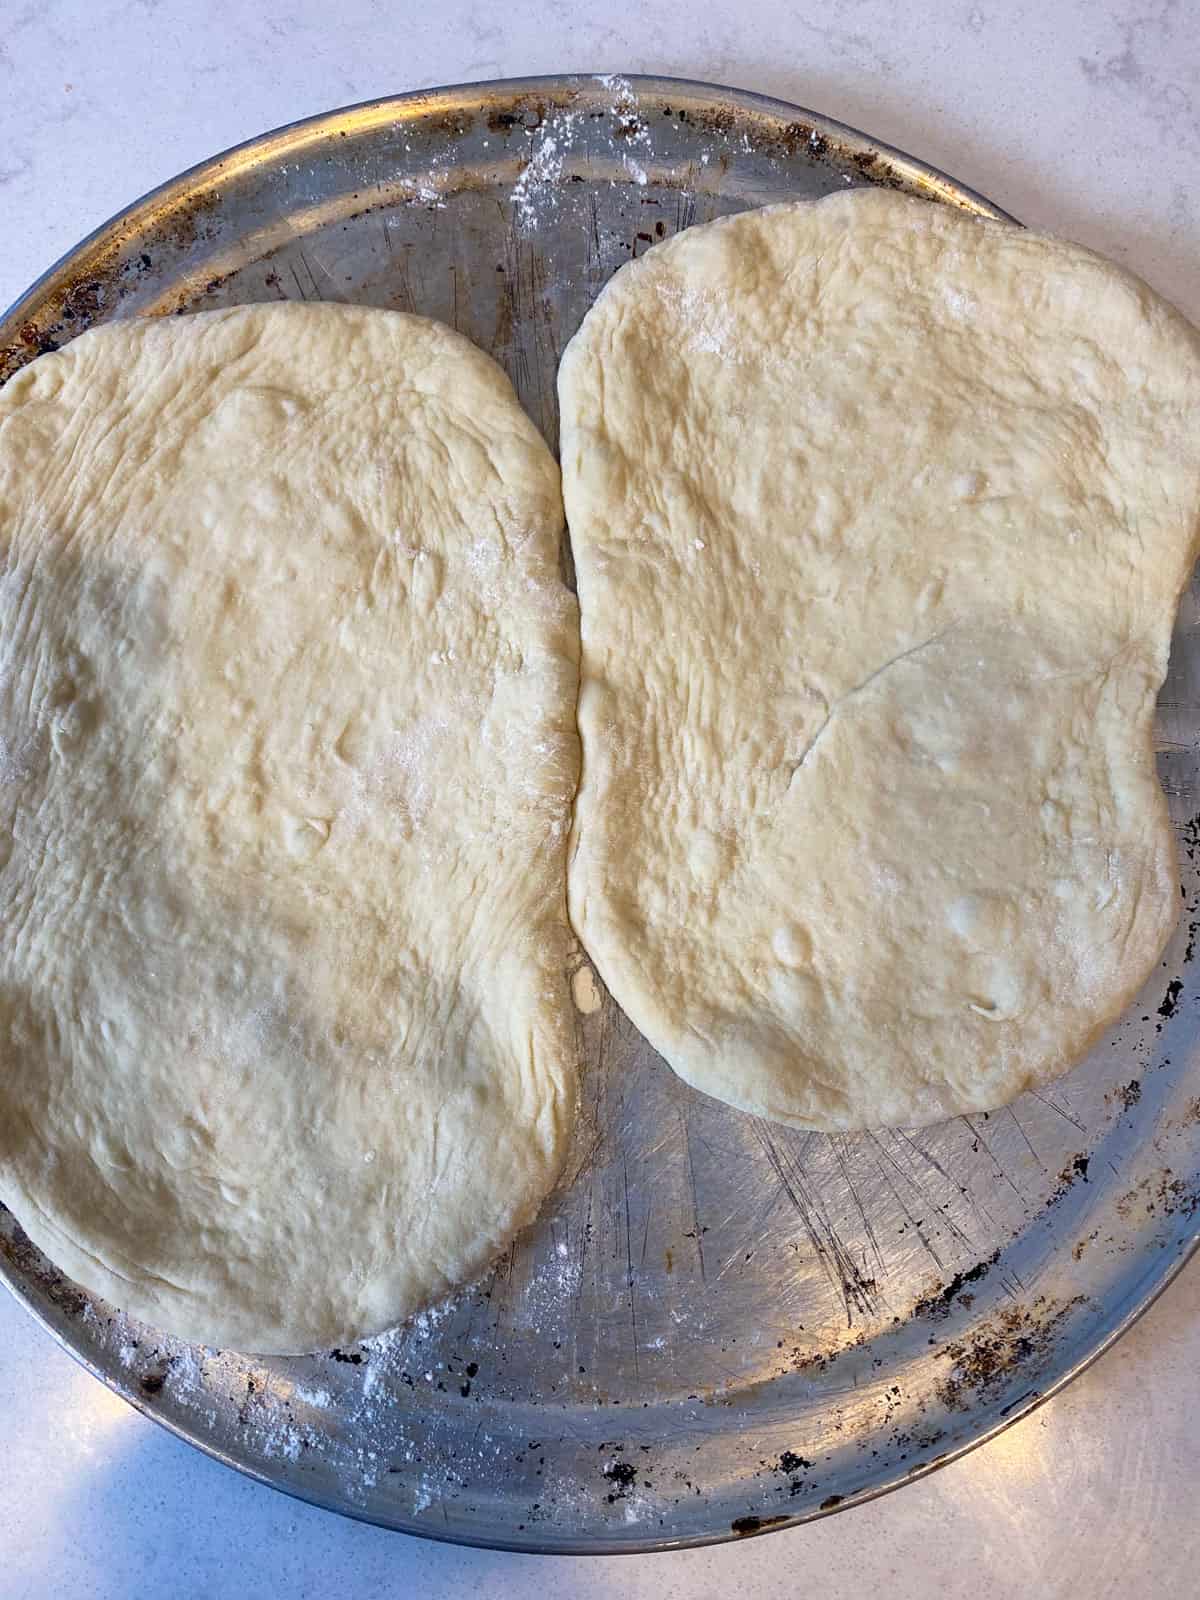 Stretch out both halves of the pizza dough into an oblong shape.